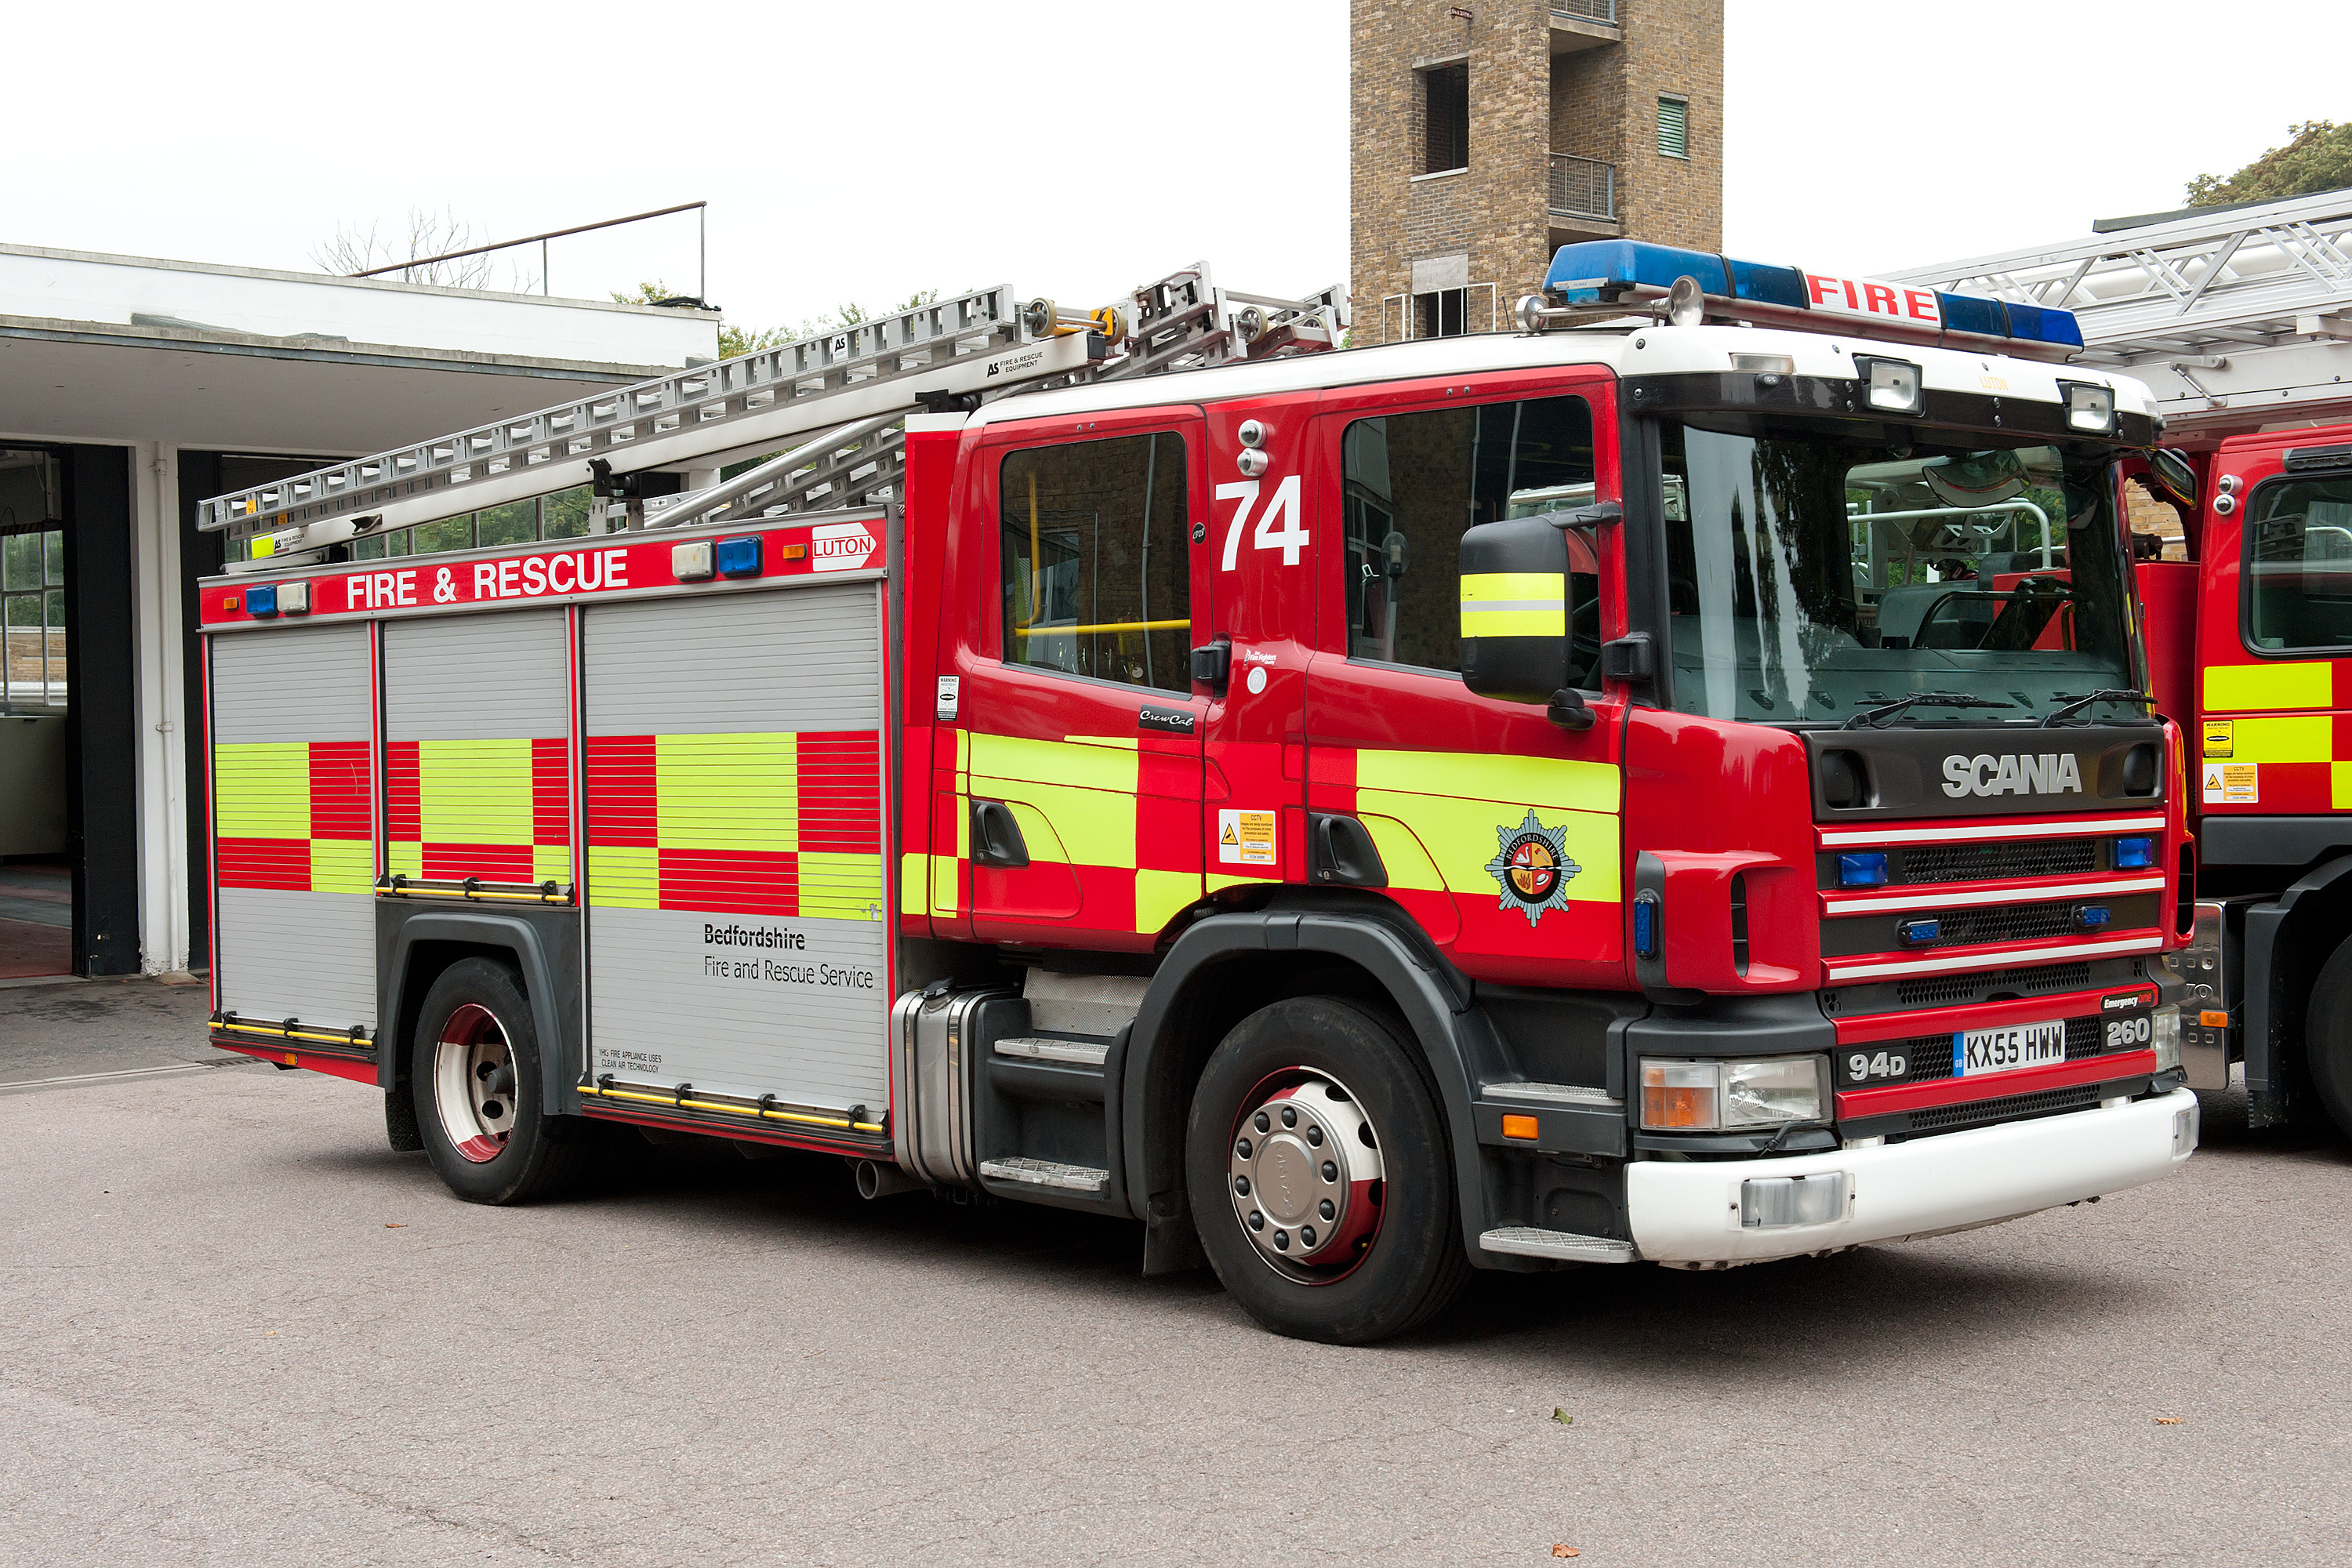 Photo of a fire engine parked outside a fire station